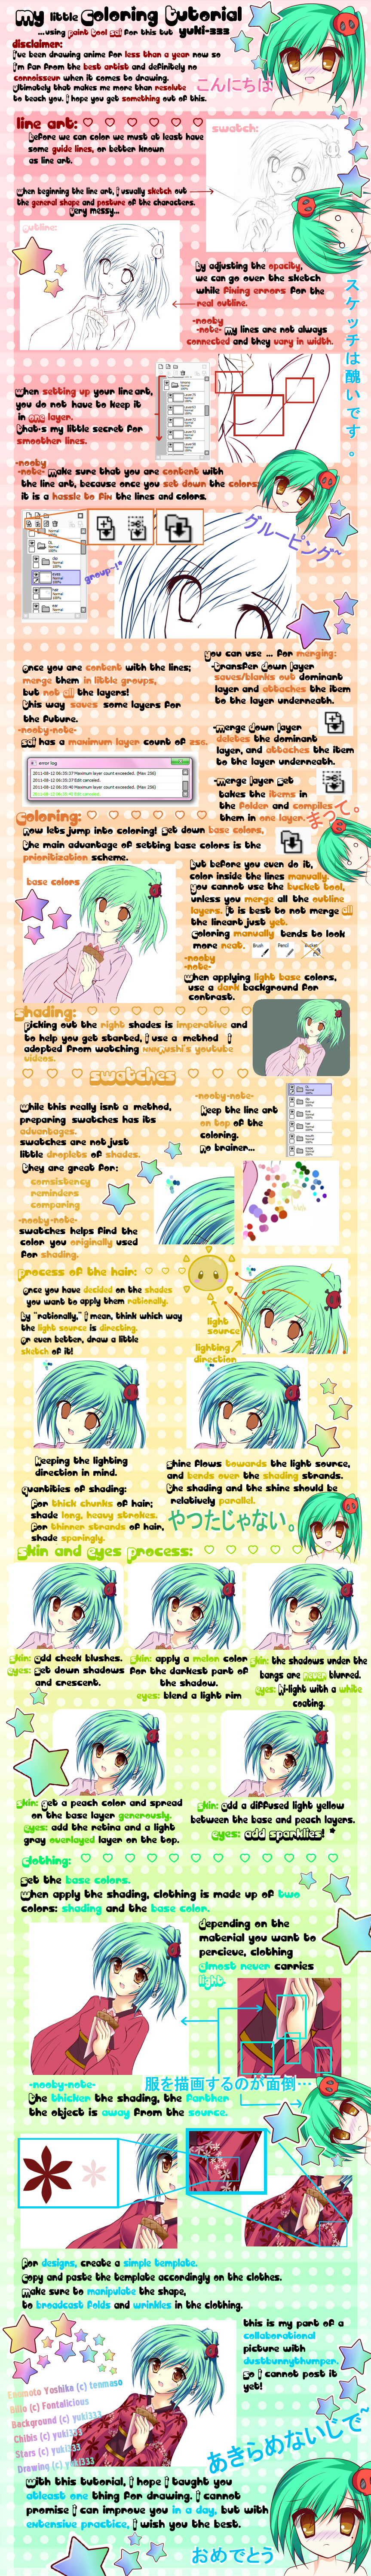 My little coloring tutorial